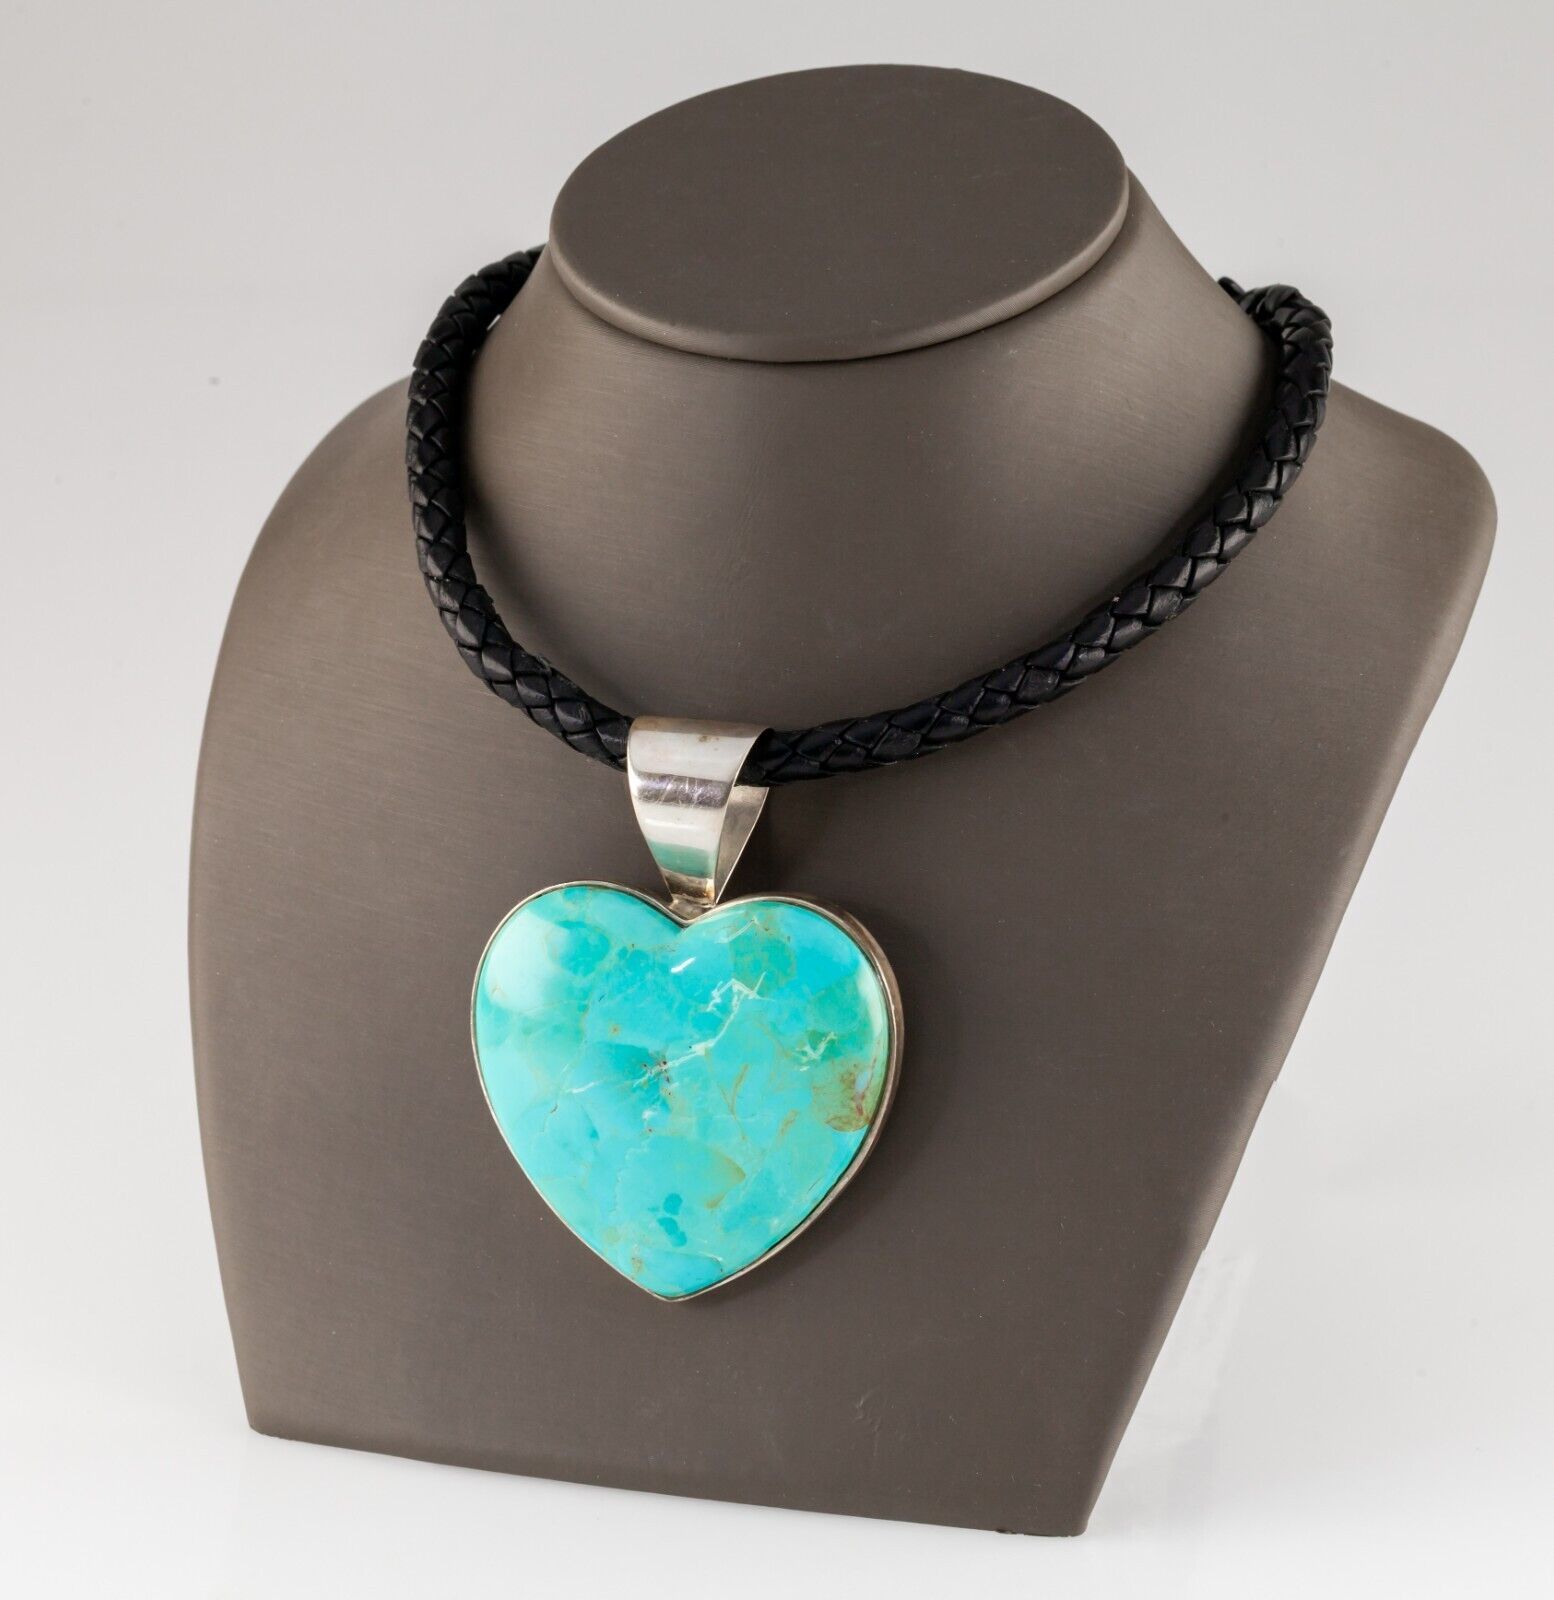 Primary image for Jay King Sterling Silver Turquoise Heart Pendant with Black Braided Leather 20"